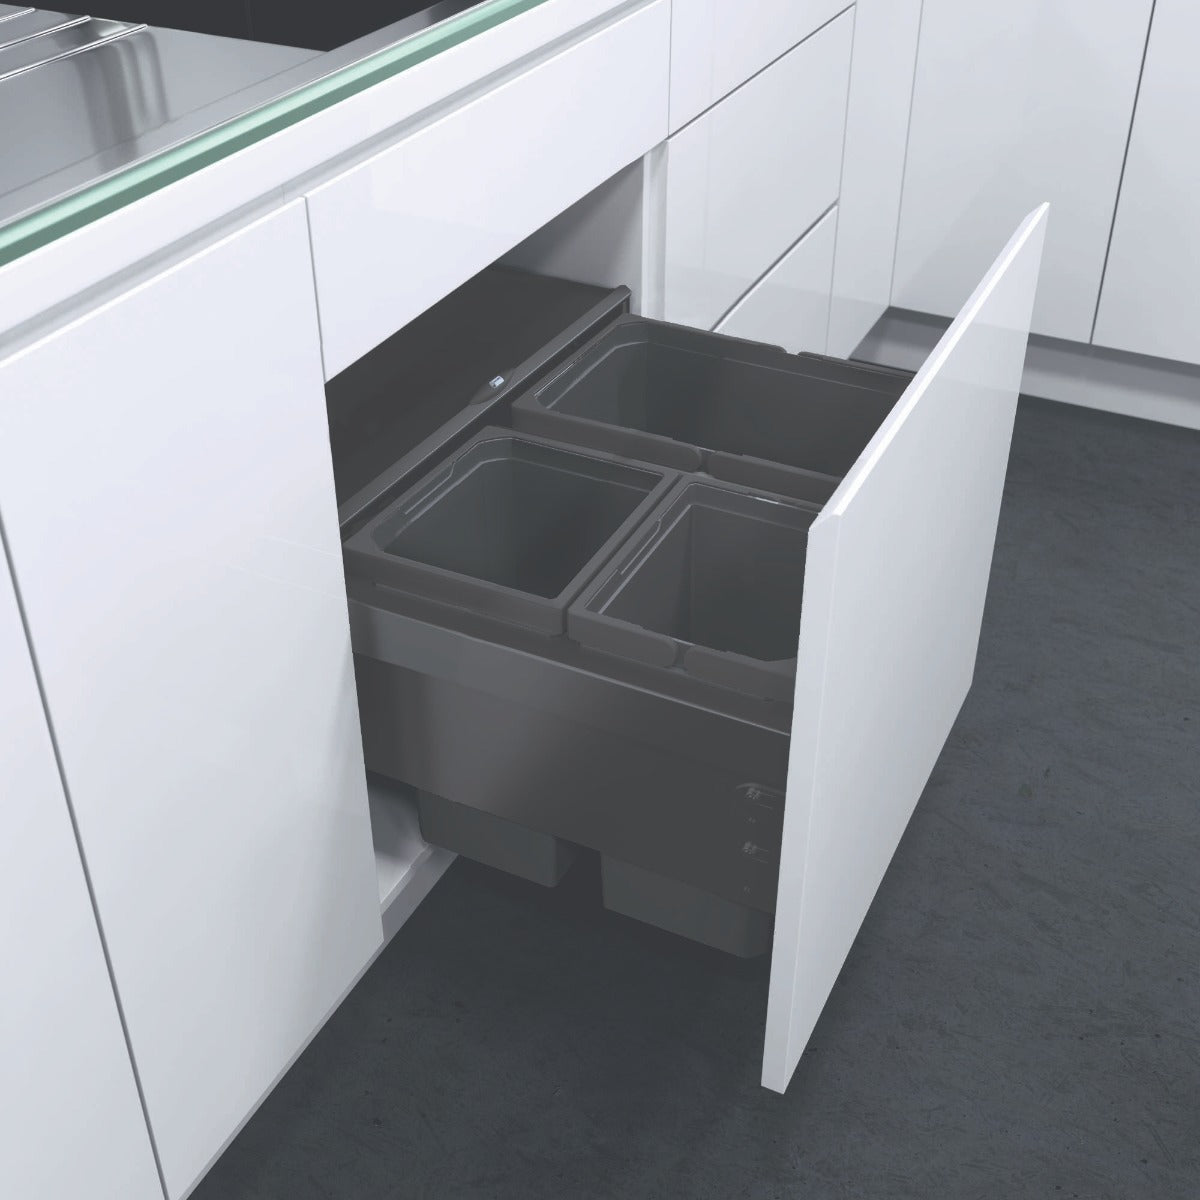 This 3-Compartment integrated recycling bin from Vauth-Sagel is in a dark lave grey finish